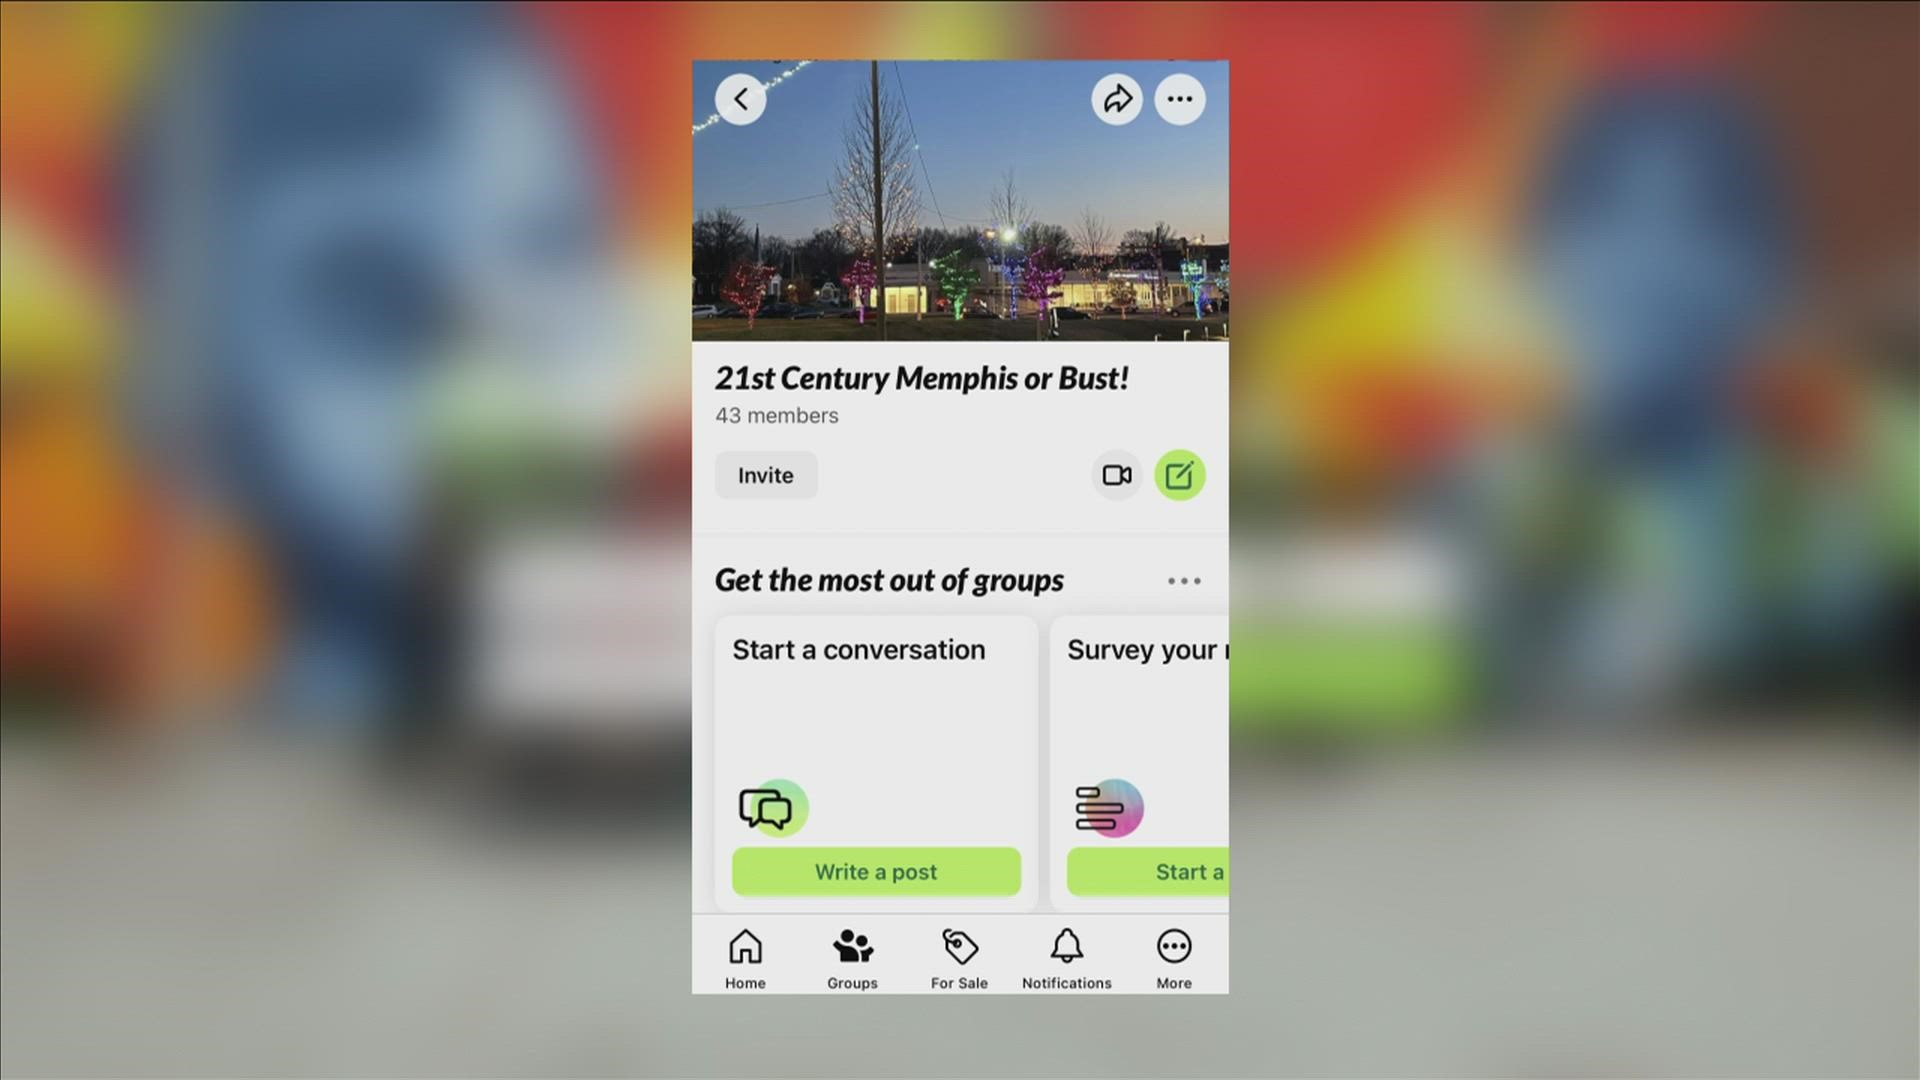 Group '21st Century Memphis or Bust' already has more than 40 members, with plans to participate in upcoming Memphis City Council meetings and MLGW citizen groups.